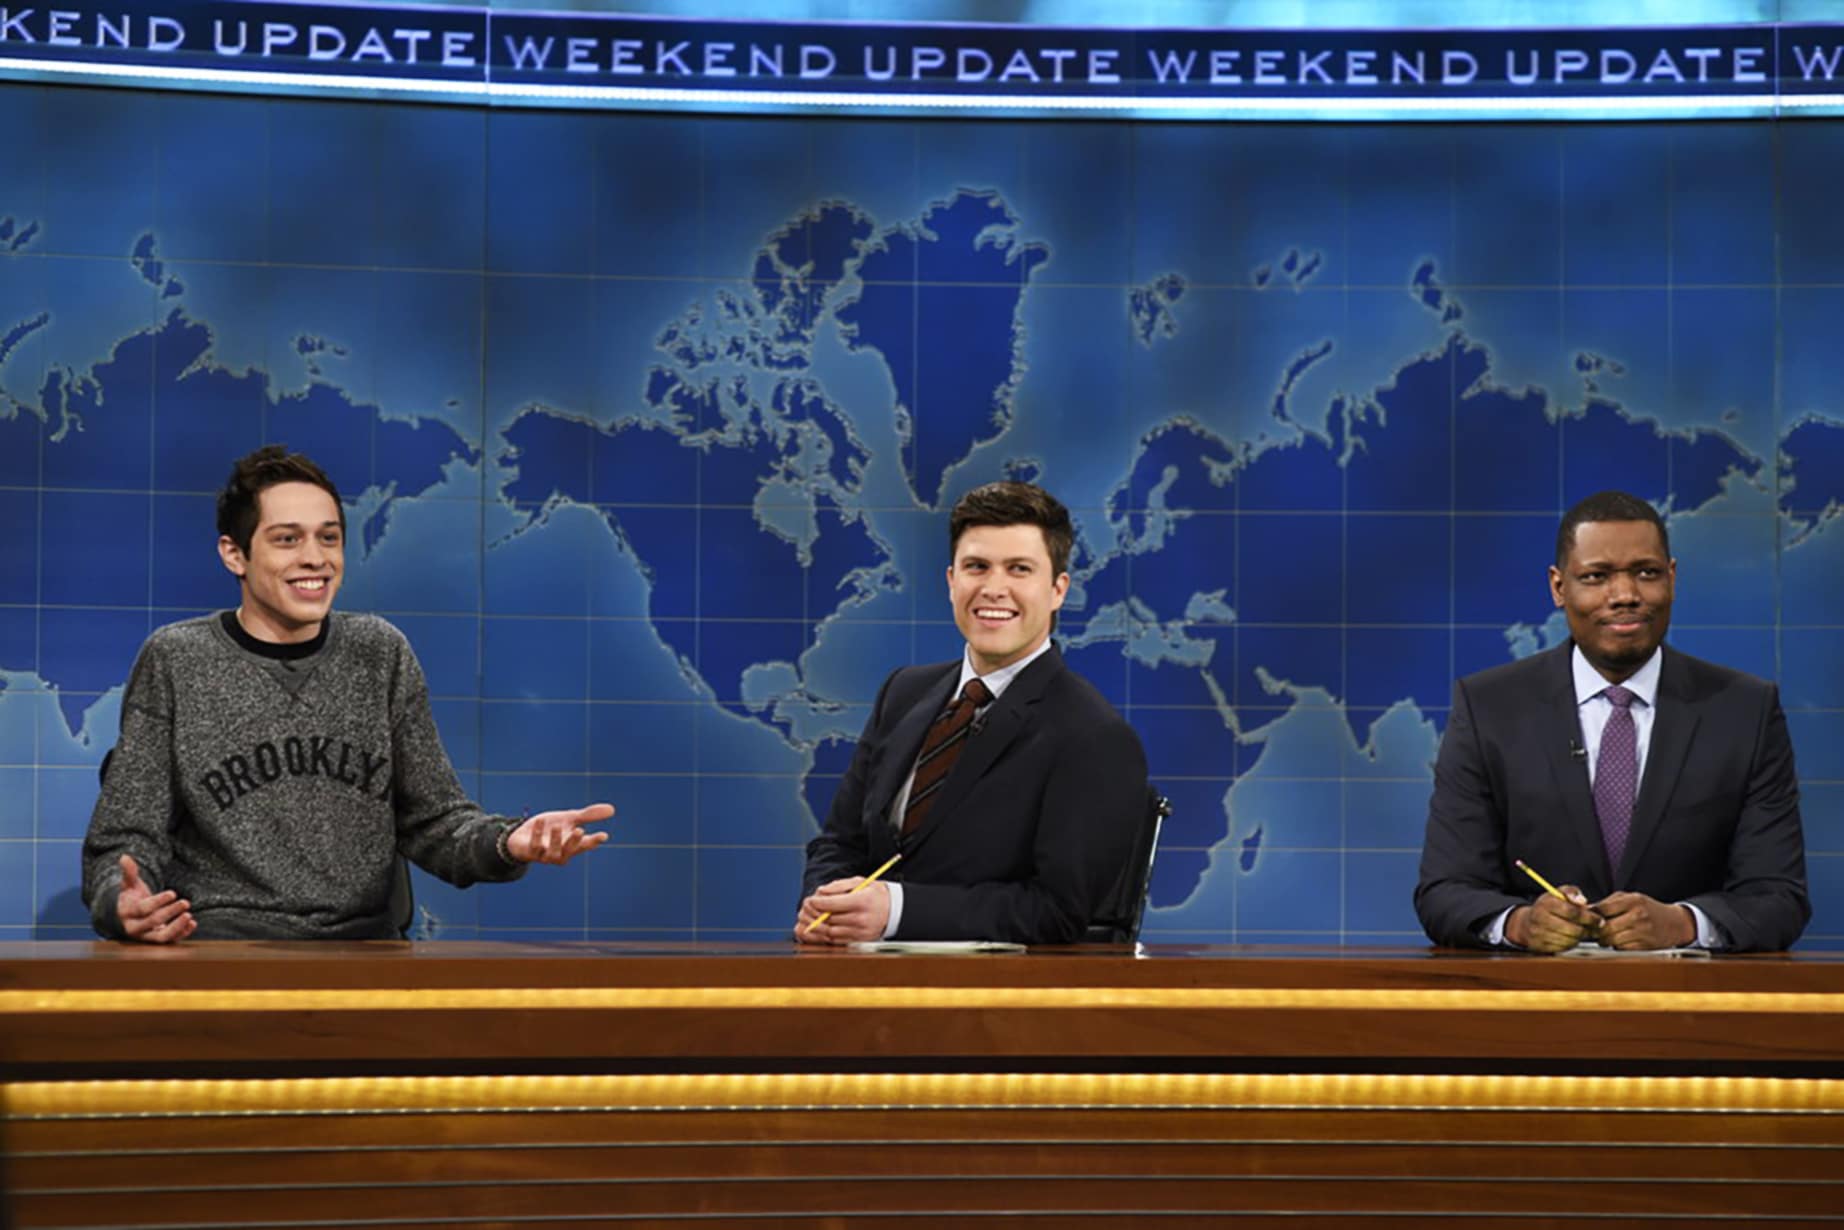 SATURDAY NIGHT LIVE, (from left): Pete Davidson, Colin Jost, Michael Che, 'Weekend Update', (Season 41, ep. 4105, aired Nov. 14, 2015)